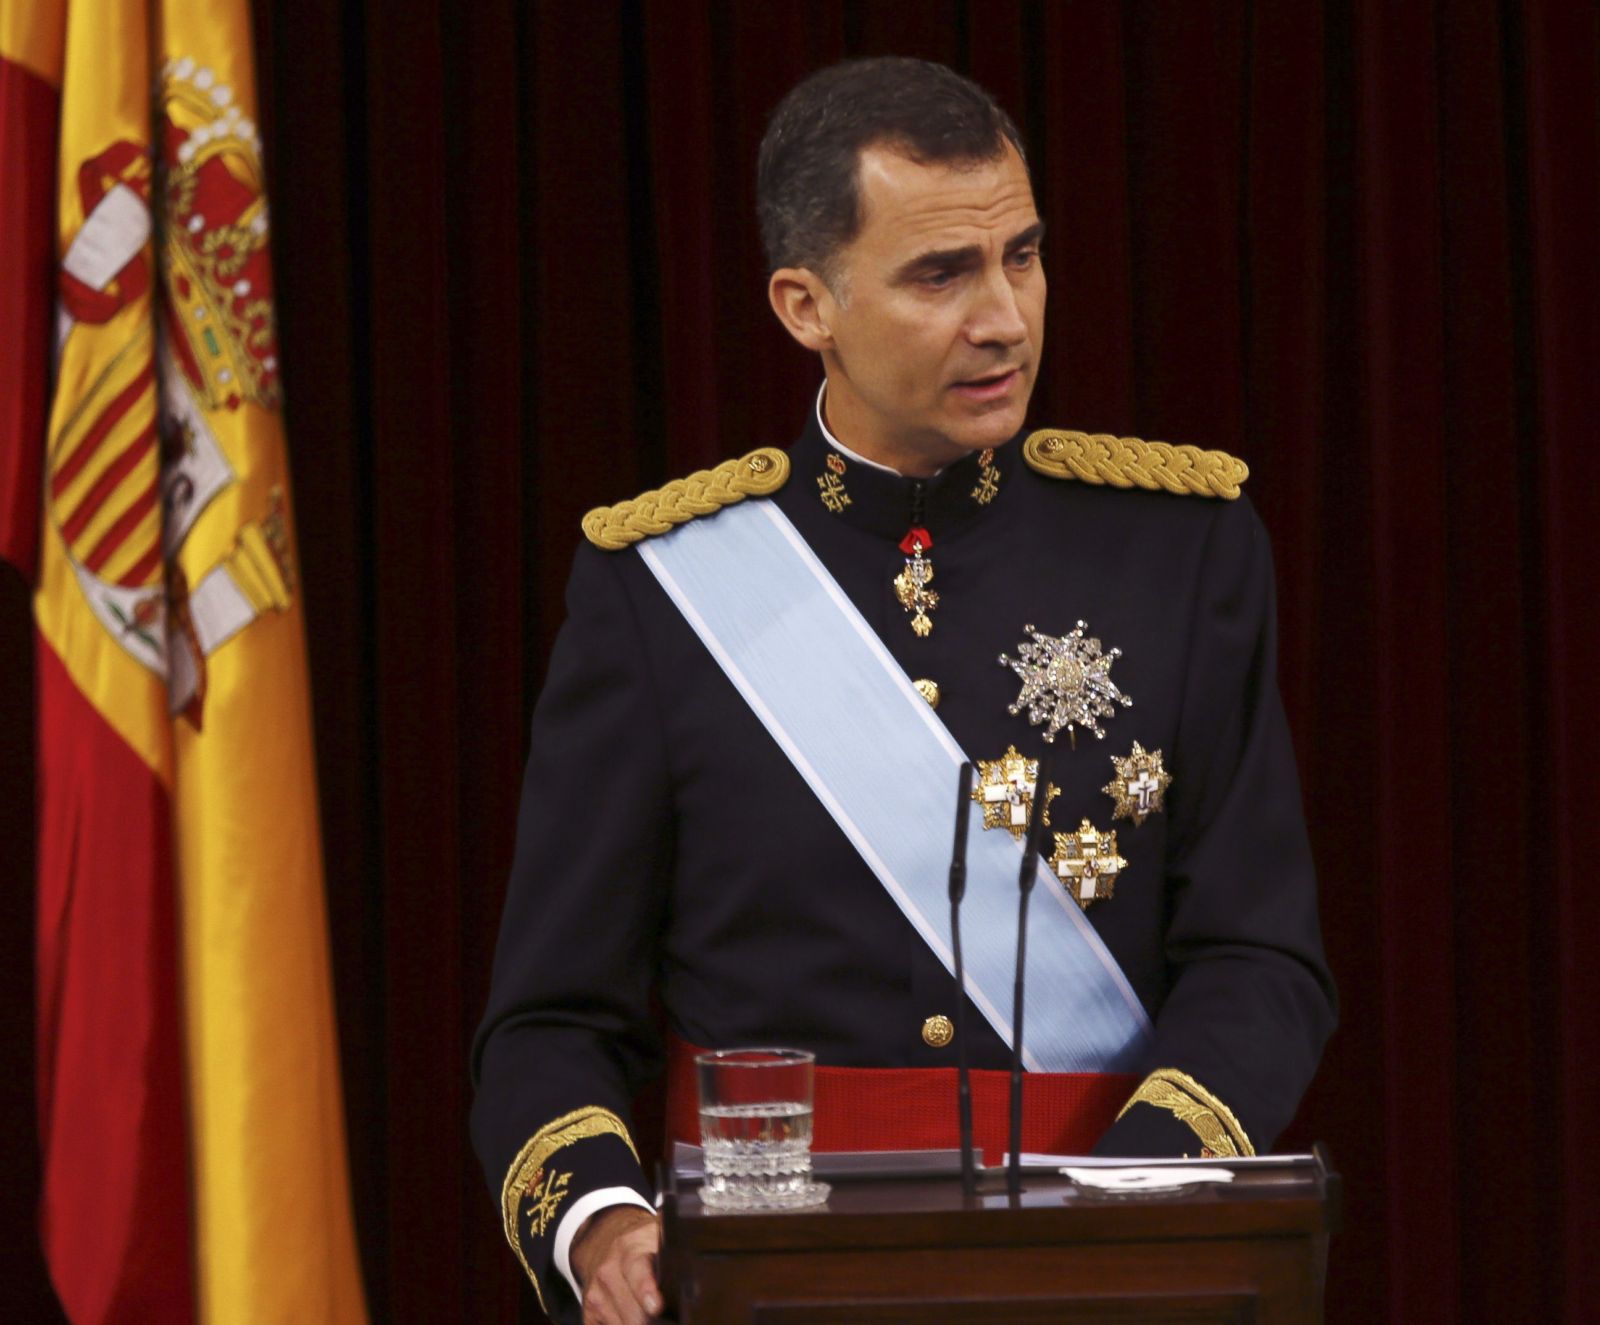 Spain's New King Sworn in Photos Image 11 ABC News